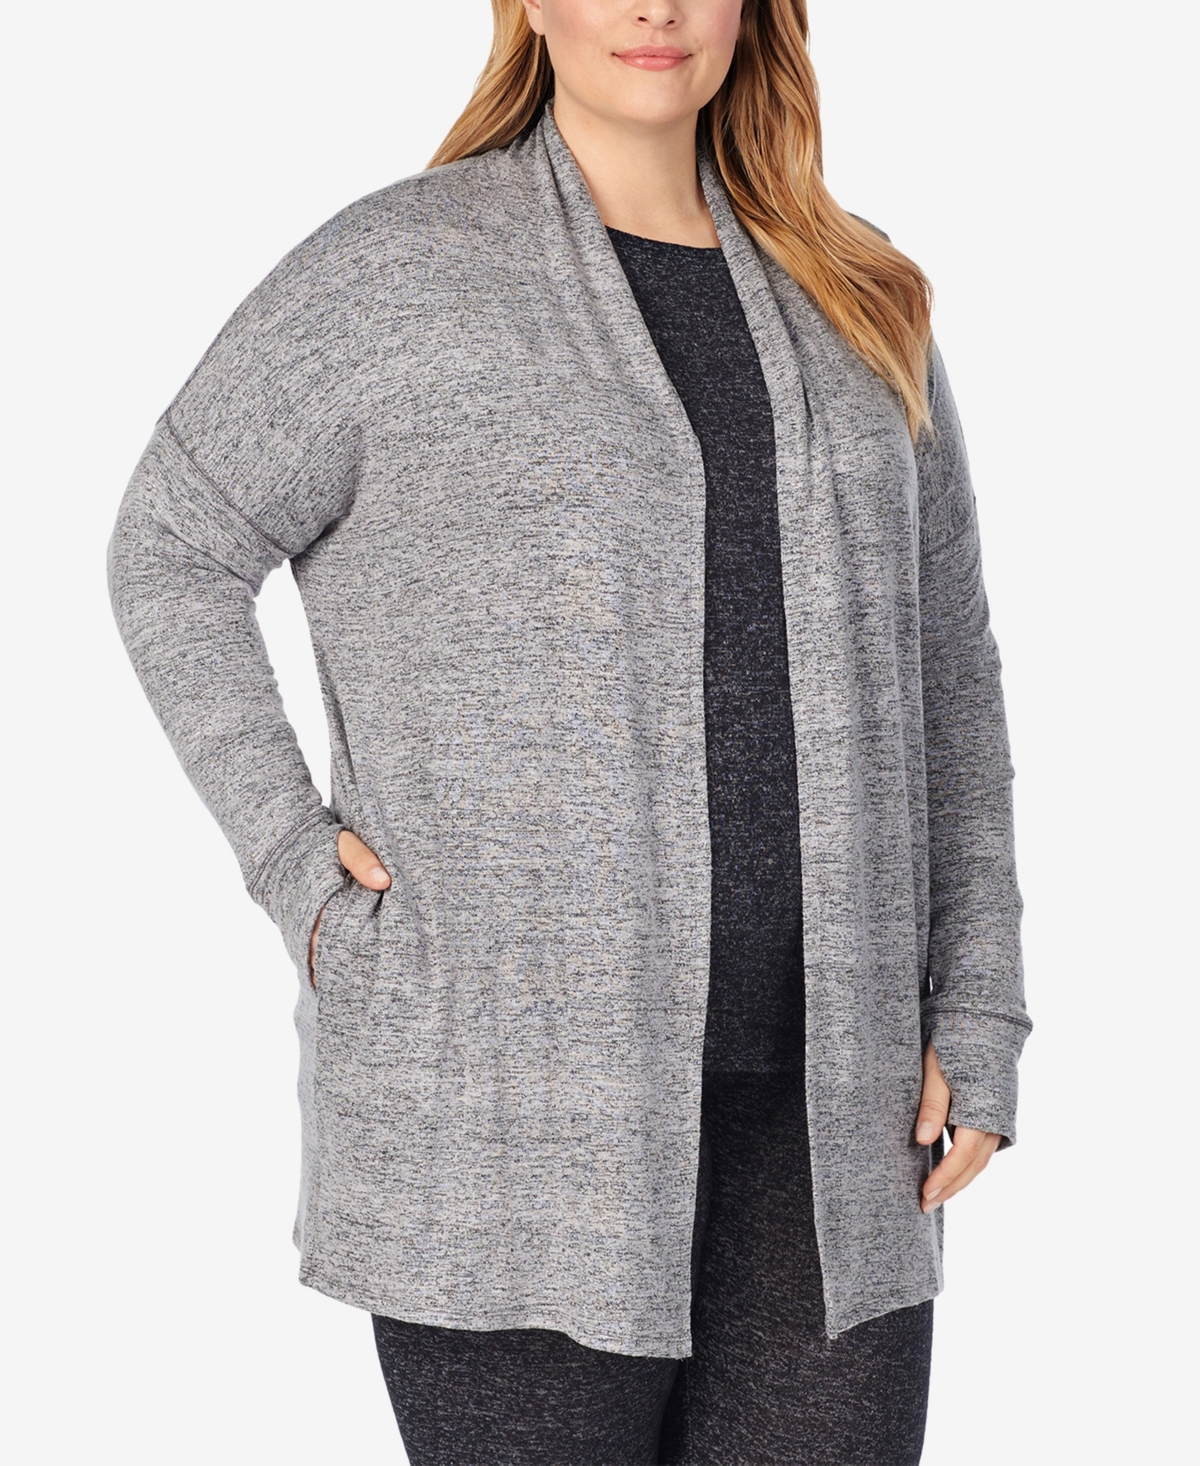 Cuddl Duds Cuddle Duds Plus Size Soft Knit Open-front Wrap In Marled Grey